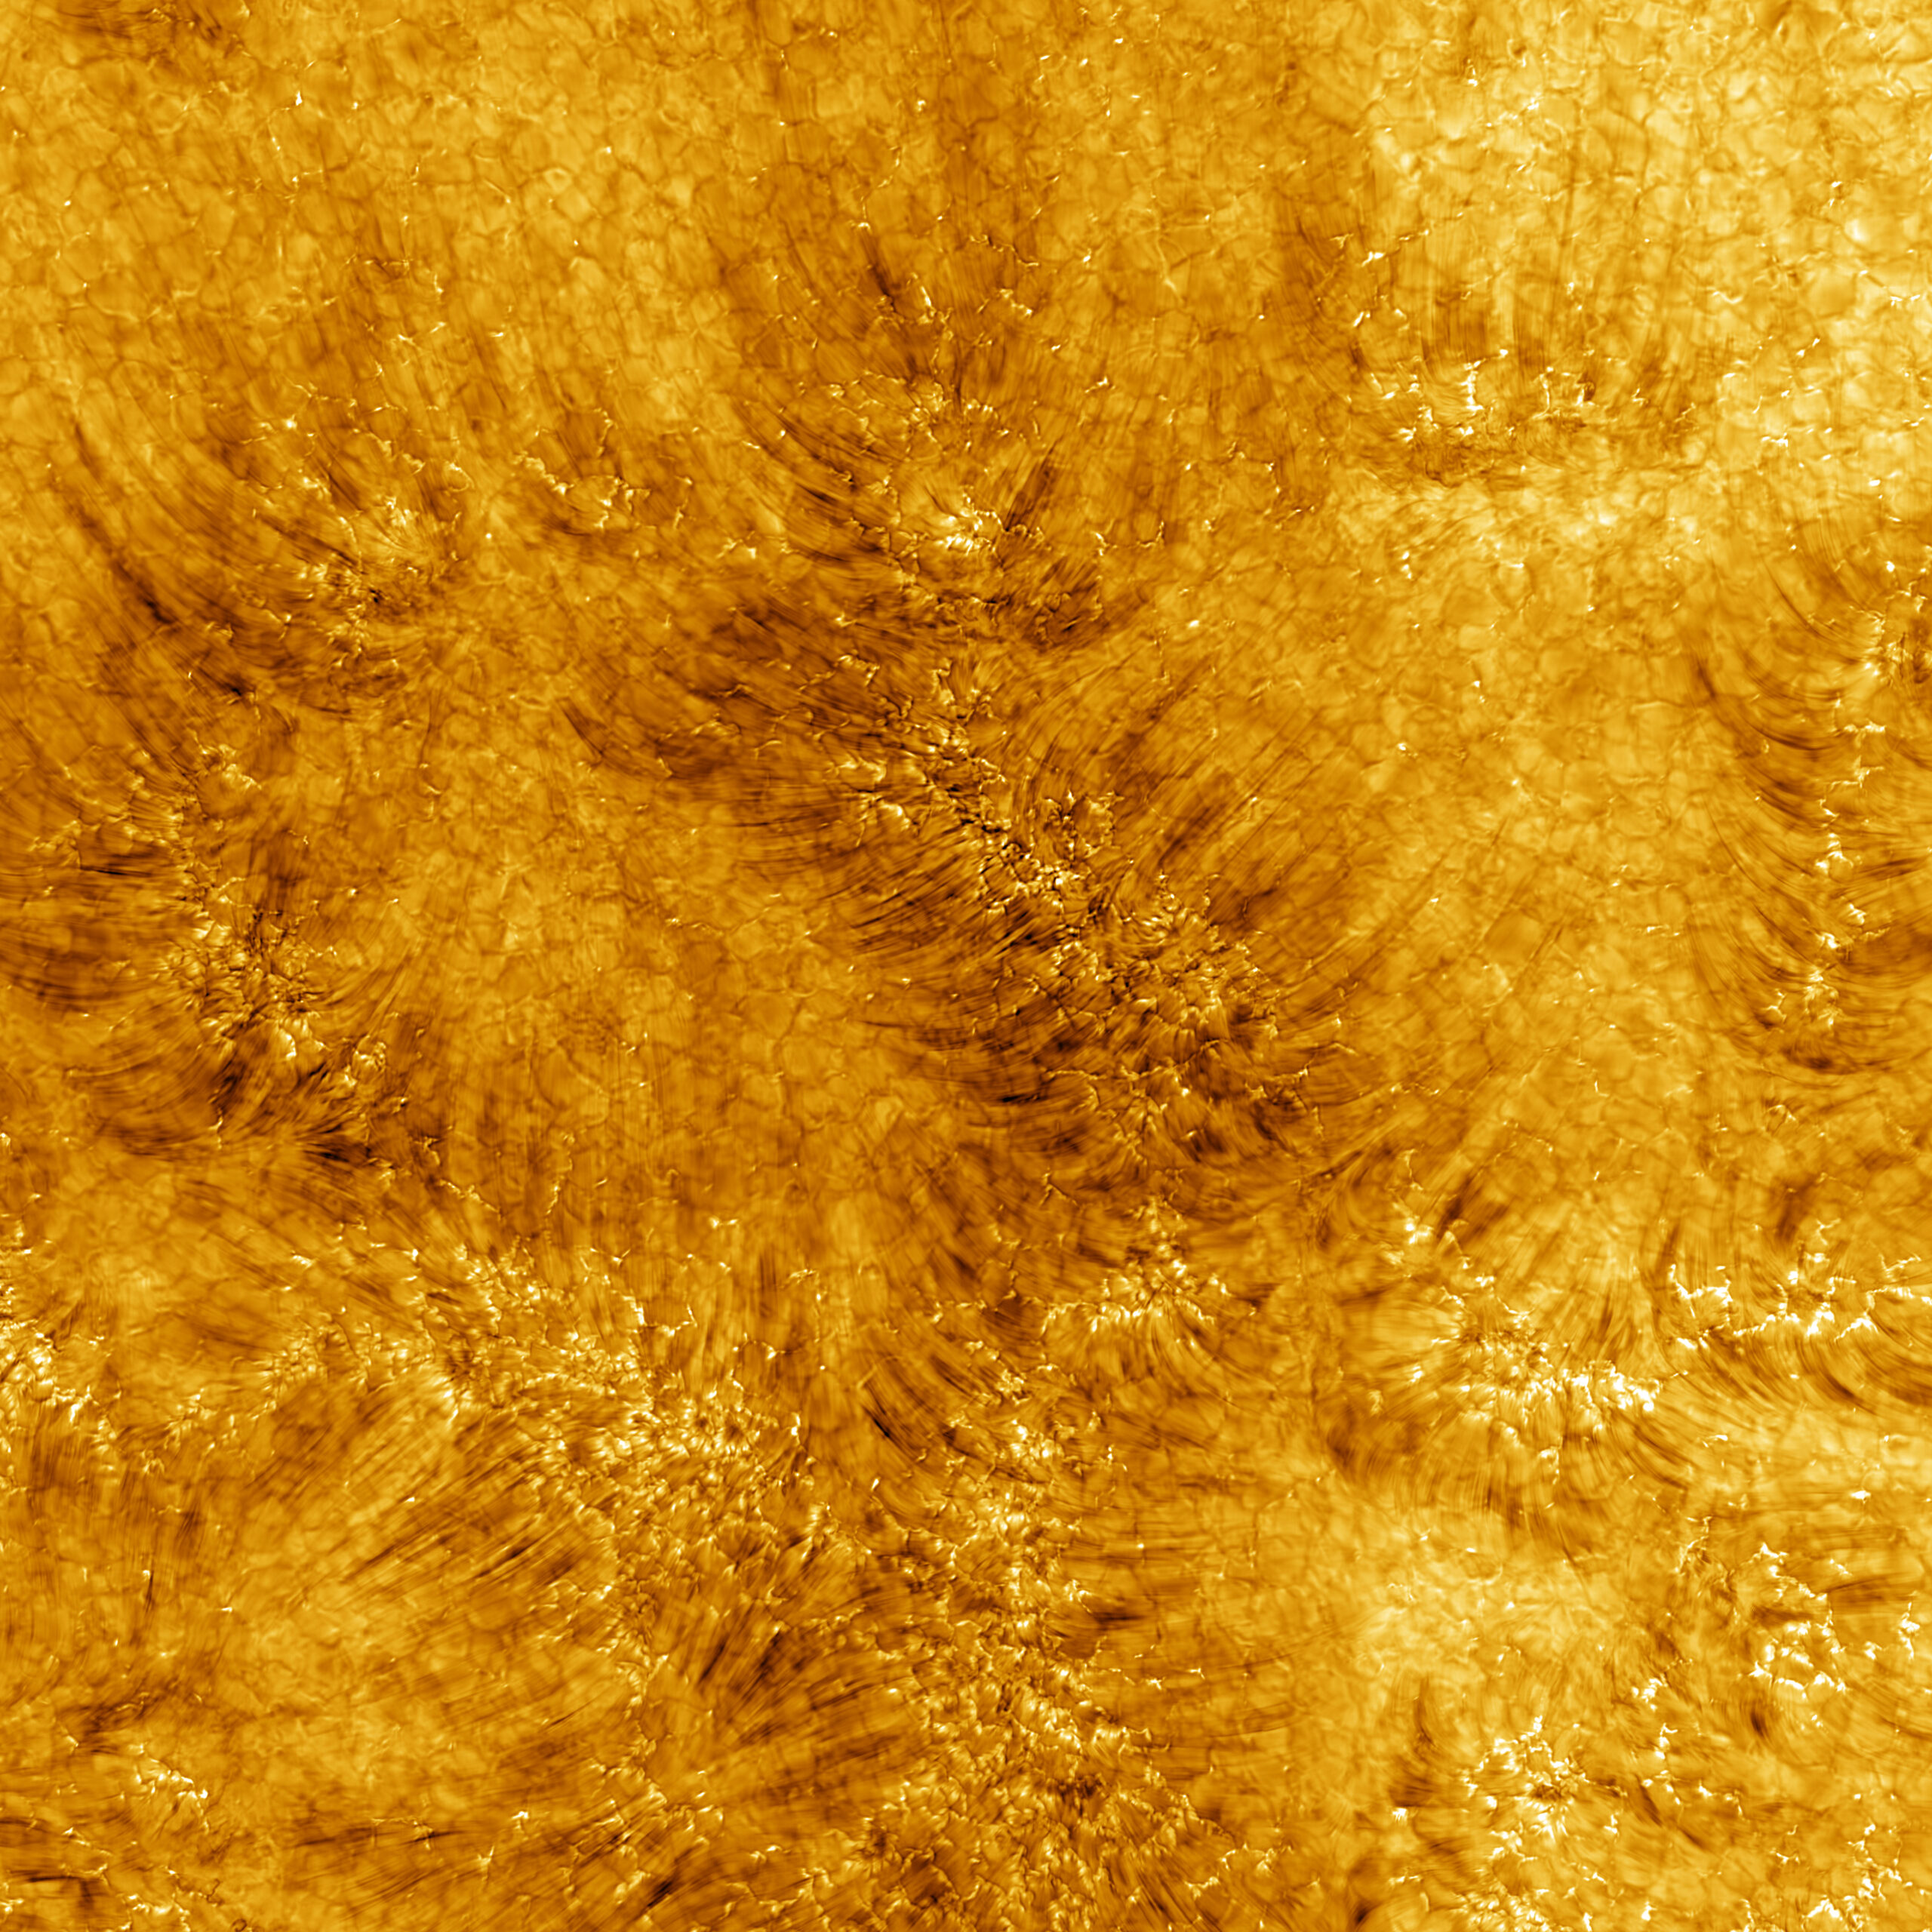 Insanely High-Resolution Images of the Sun Show its Chromosphere in Vivid Detail